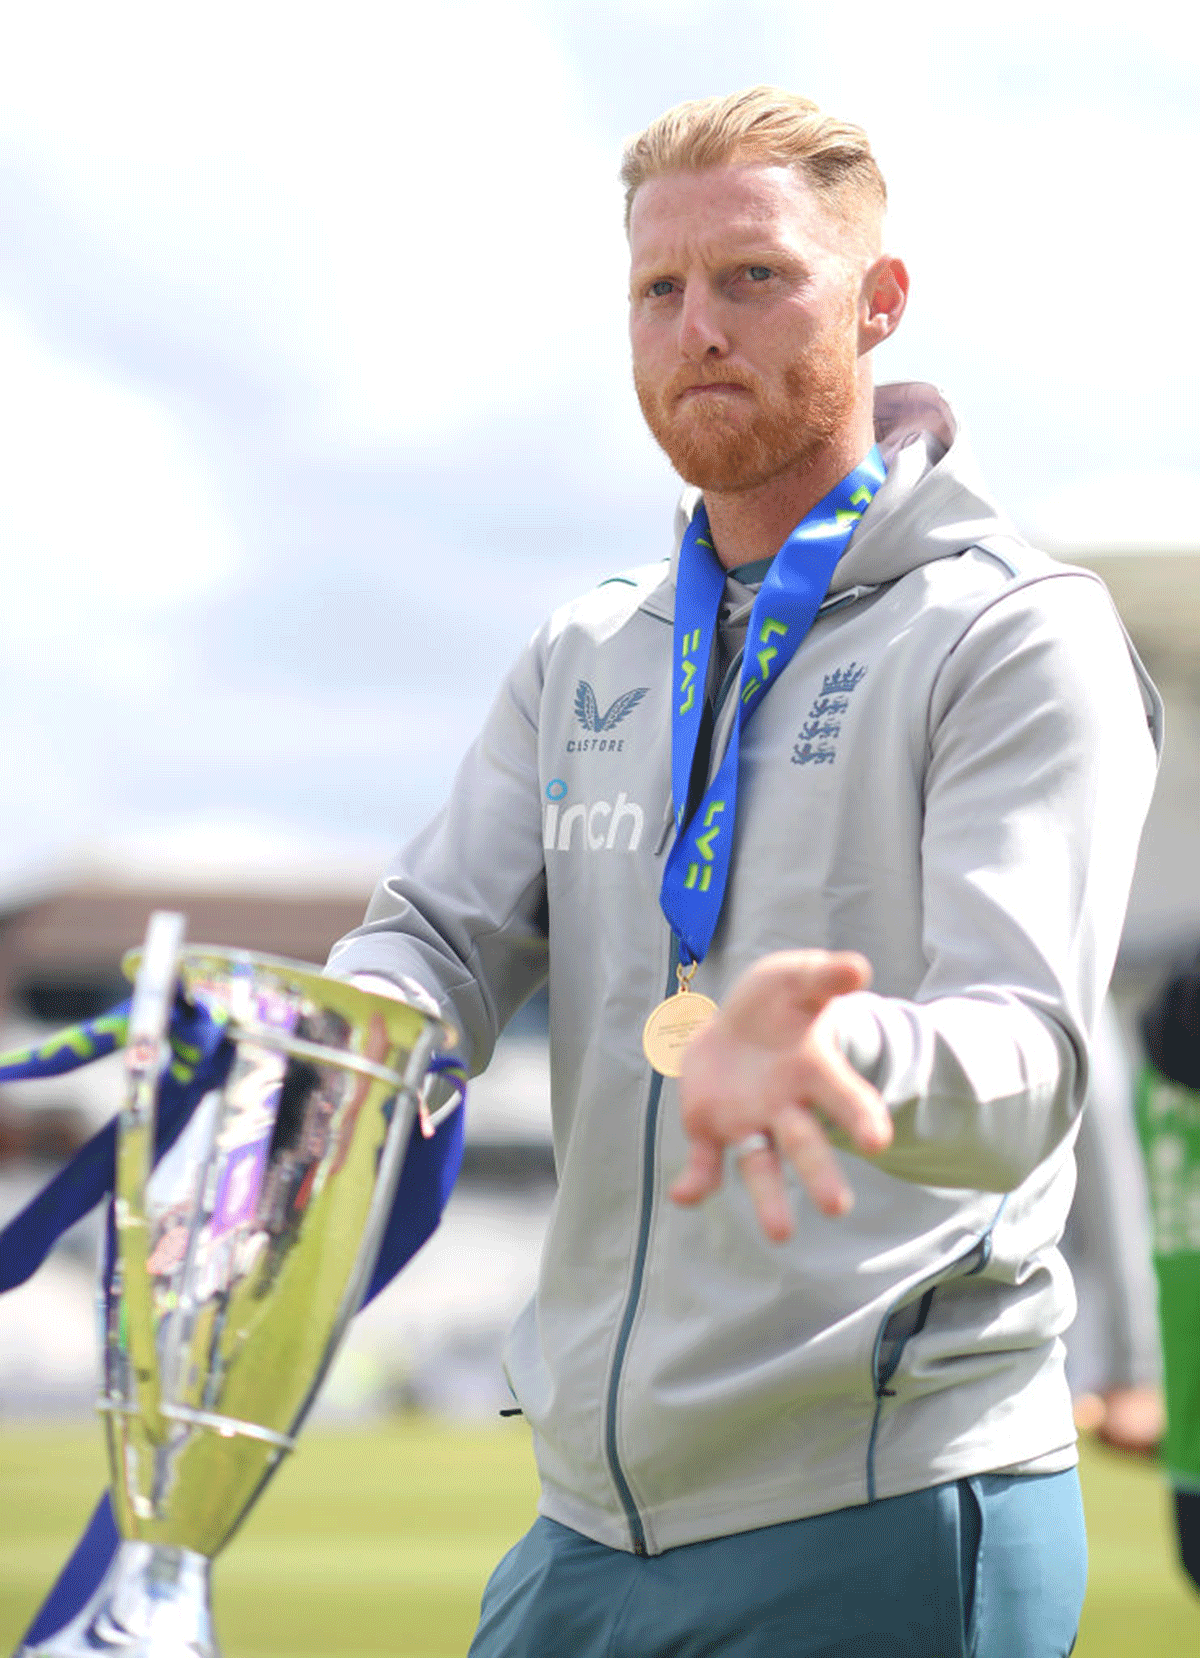 England captain Ben Stokes celebrates after winning the 3rd Test against New Zealand at Headingley on Monday